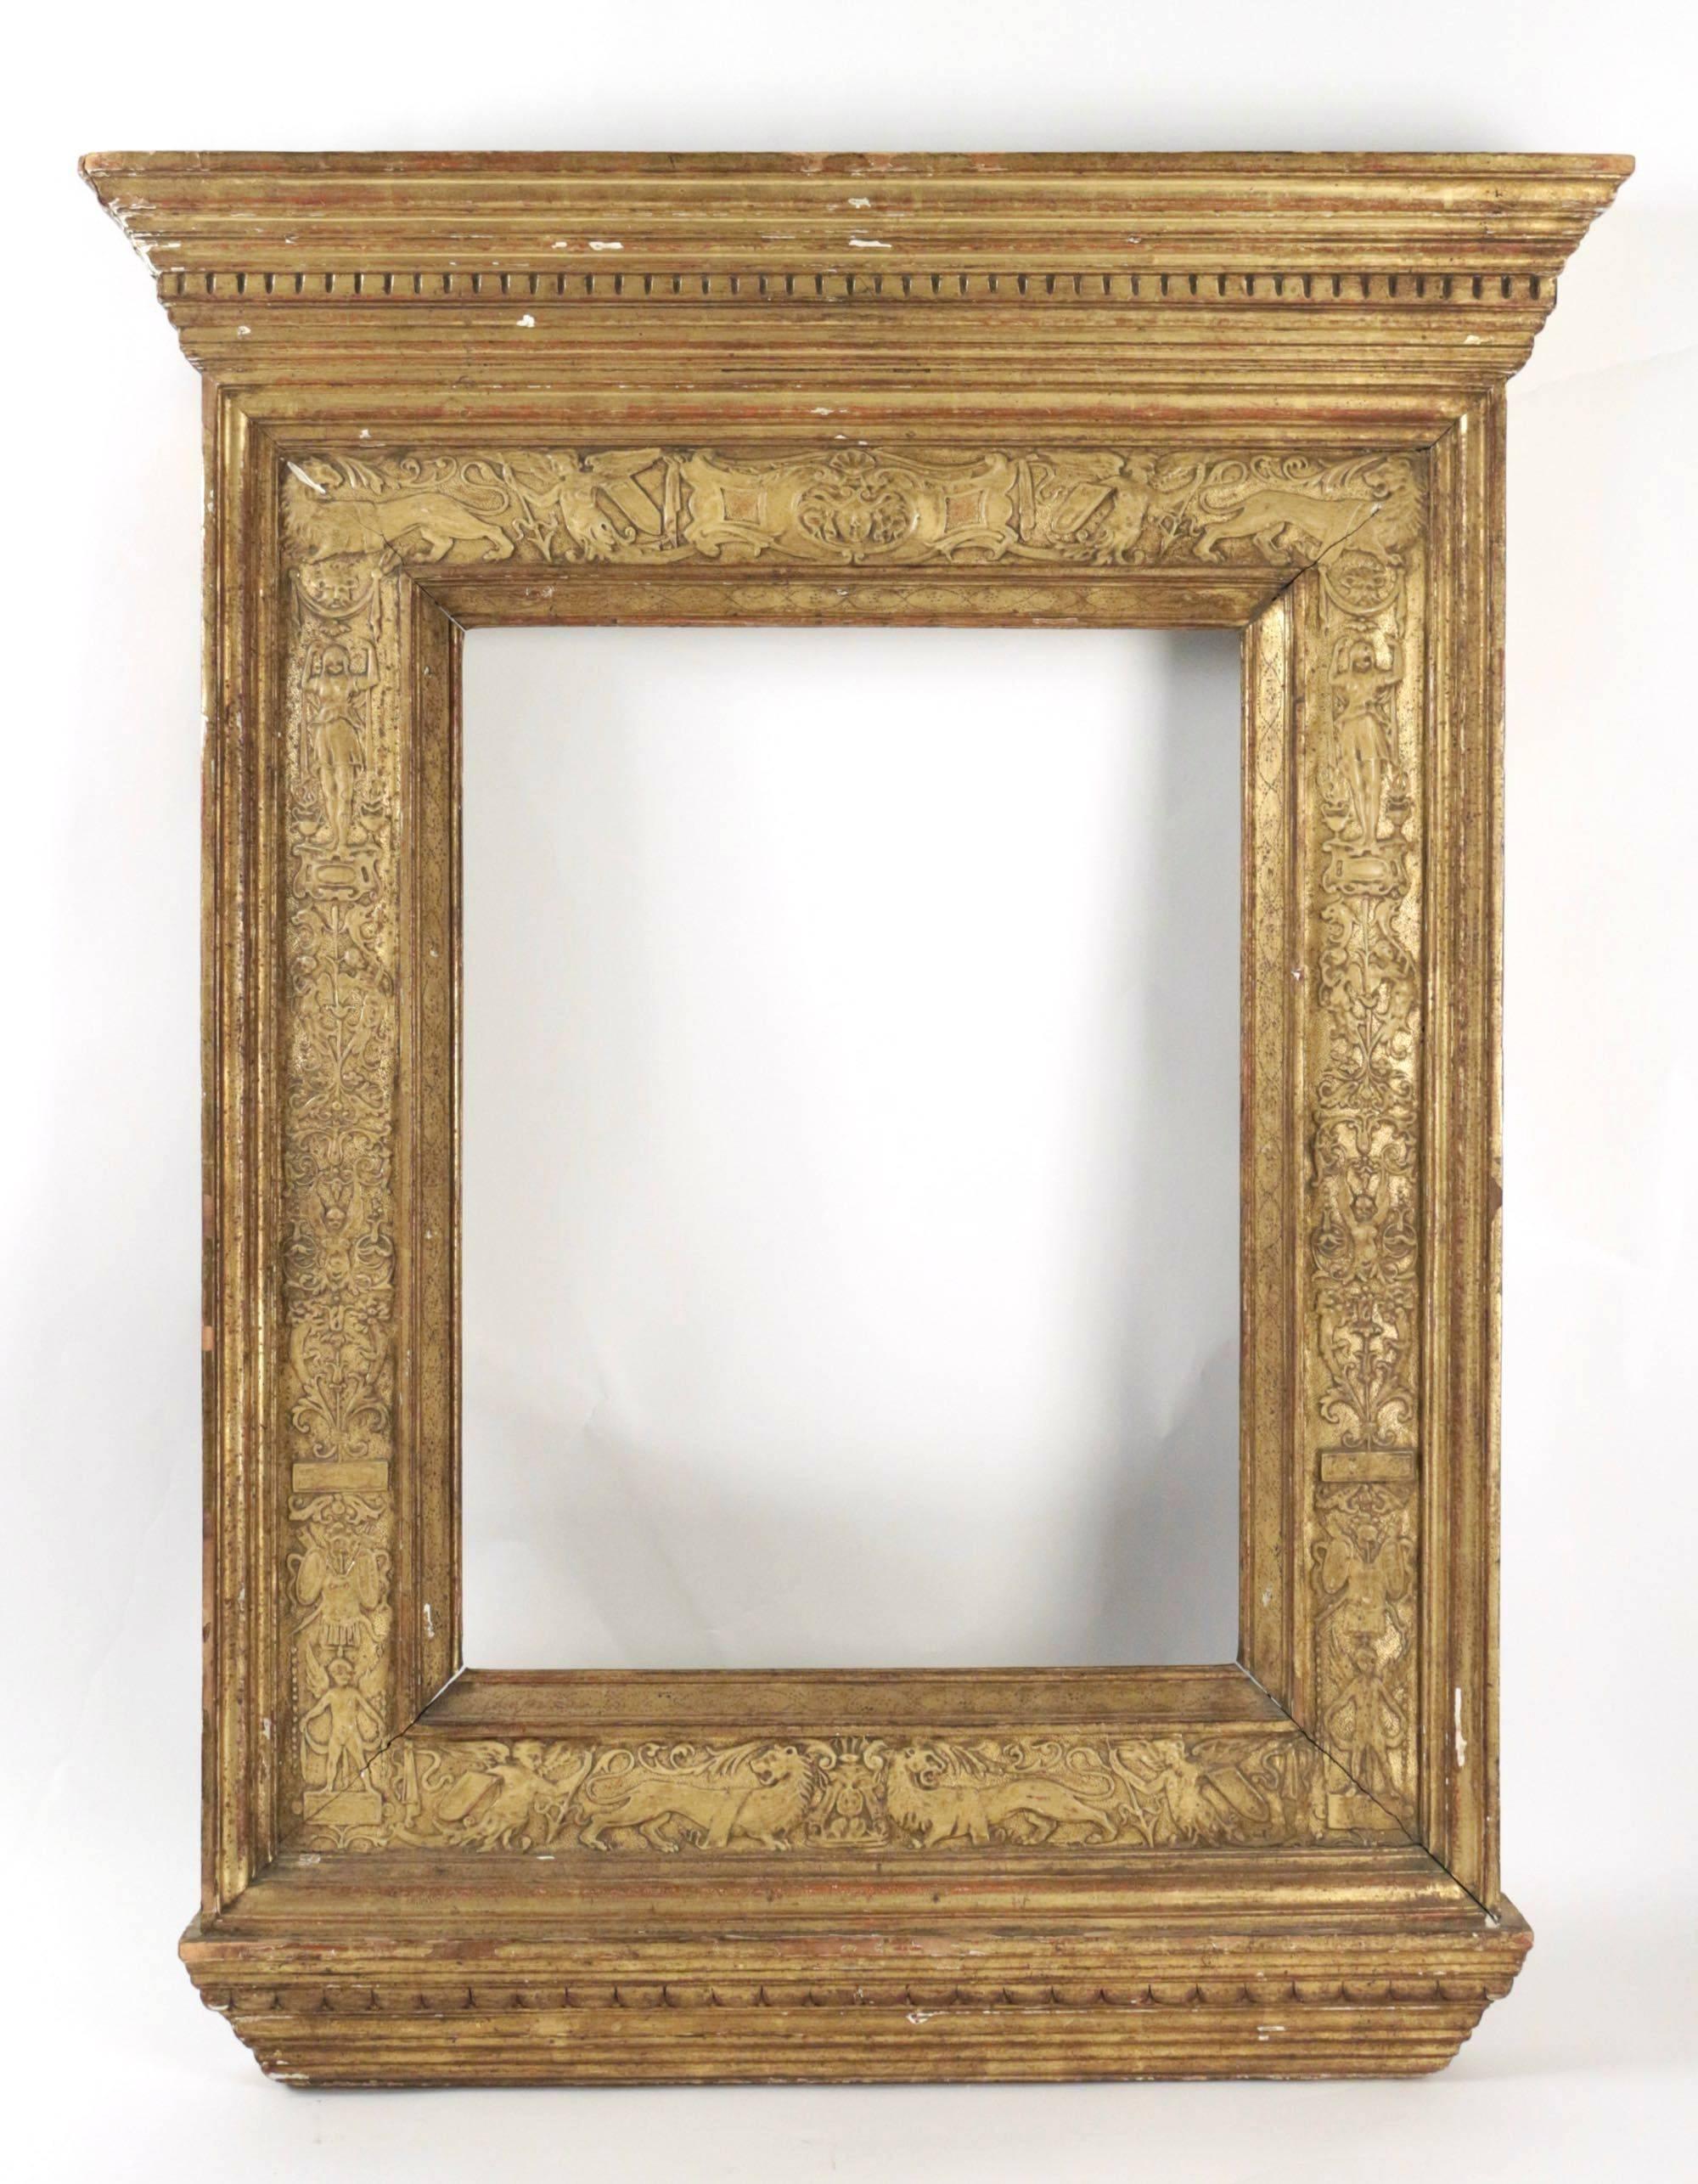 Italian Renaissance style frame mounted as mirror, Italy, late 19th century.
Carved giltwood and gilded gesso with a decor of animals, flowers, scrolls and putti.
As a frame, sight size is 48 cm, H 36 cm W.
